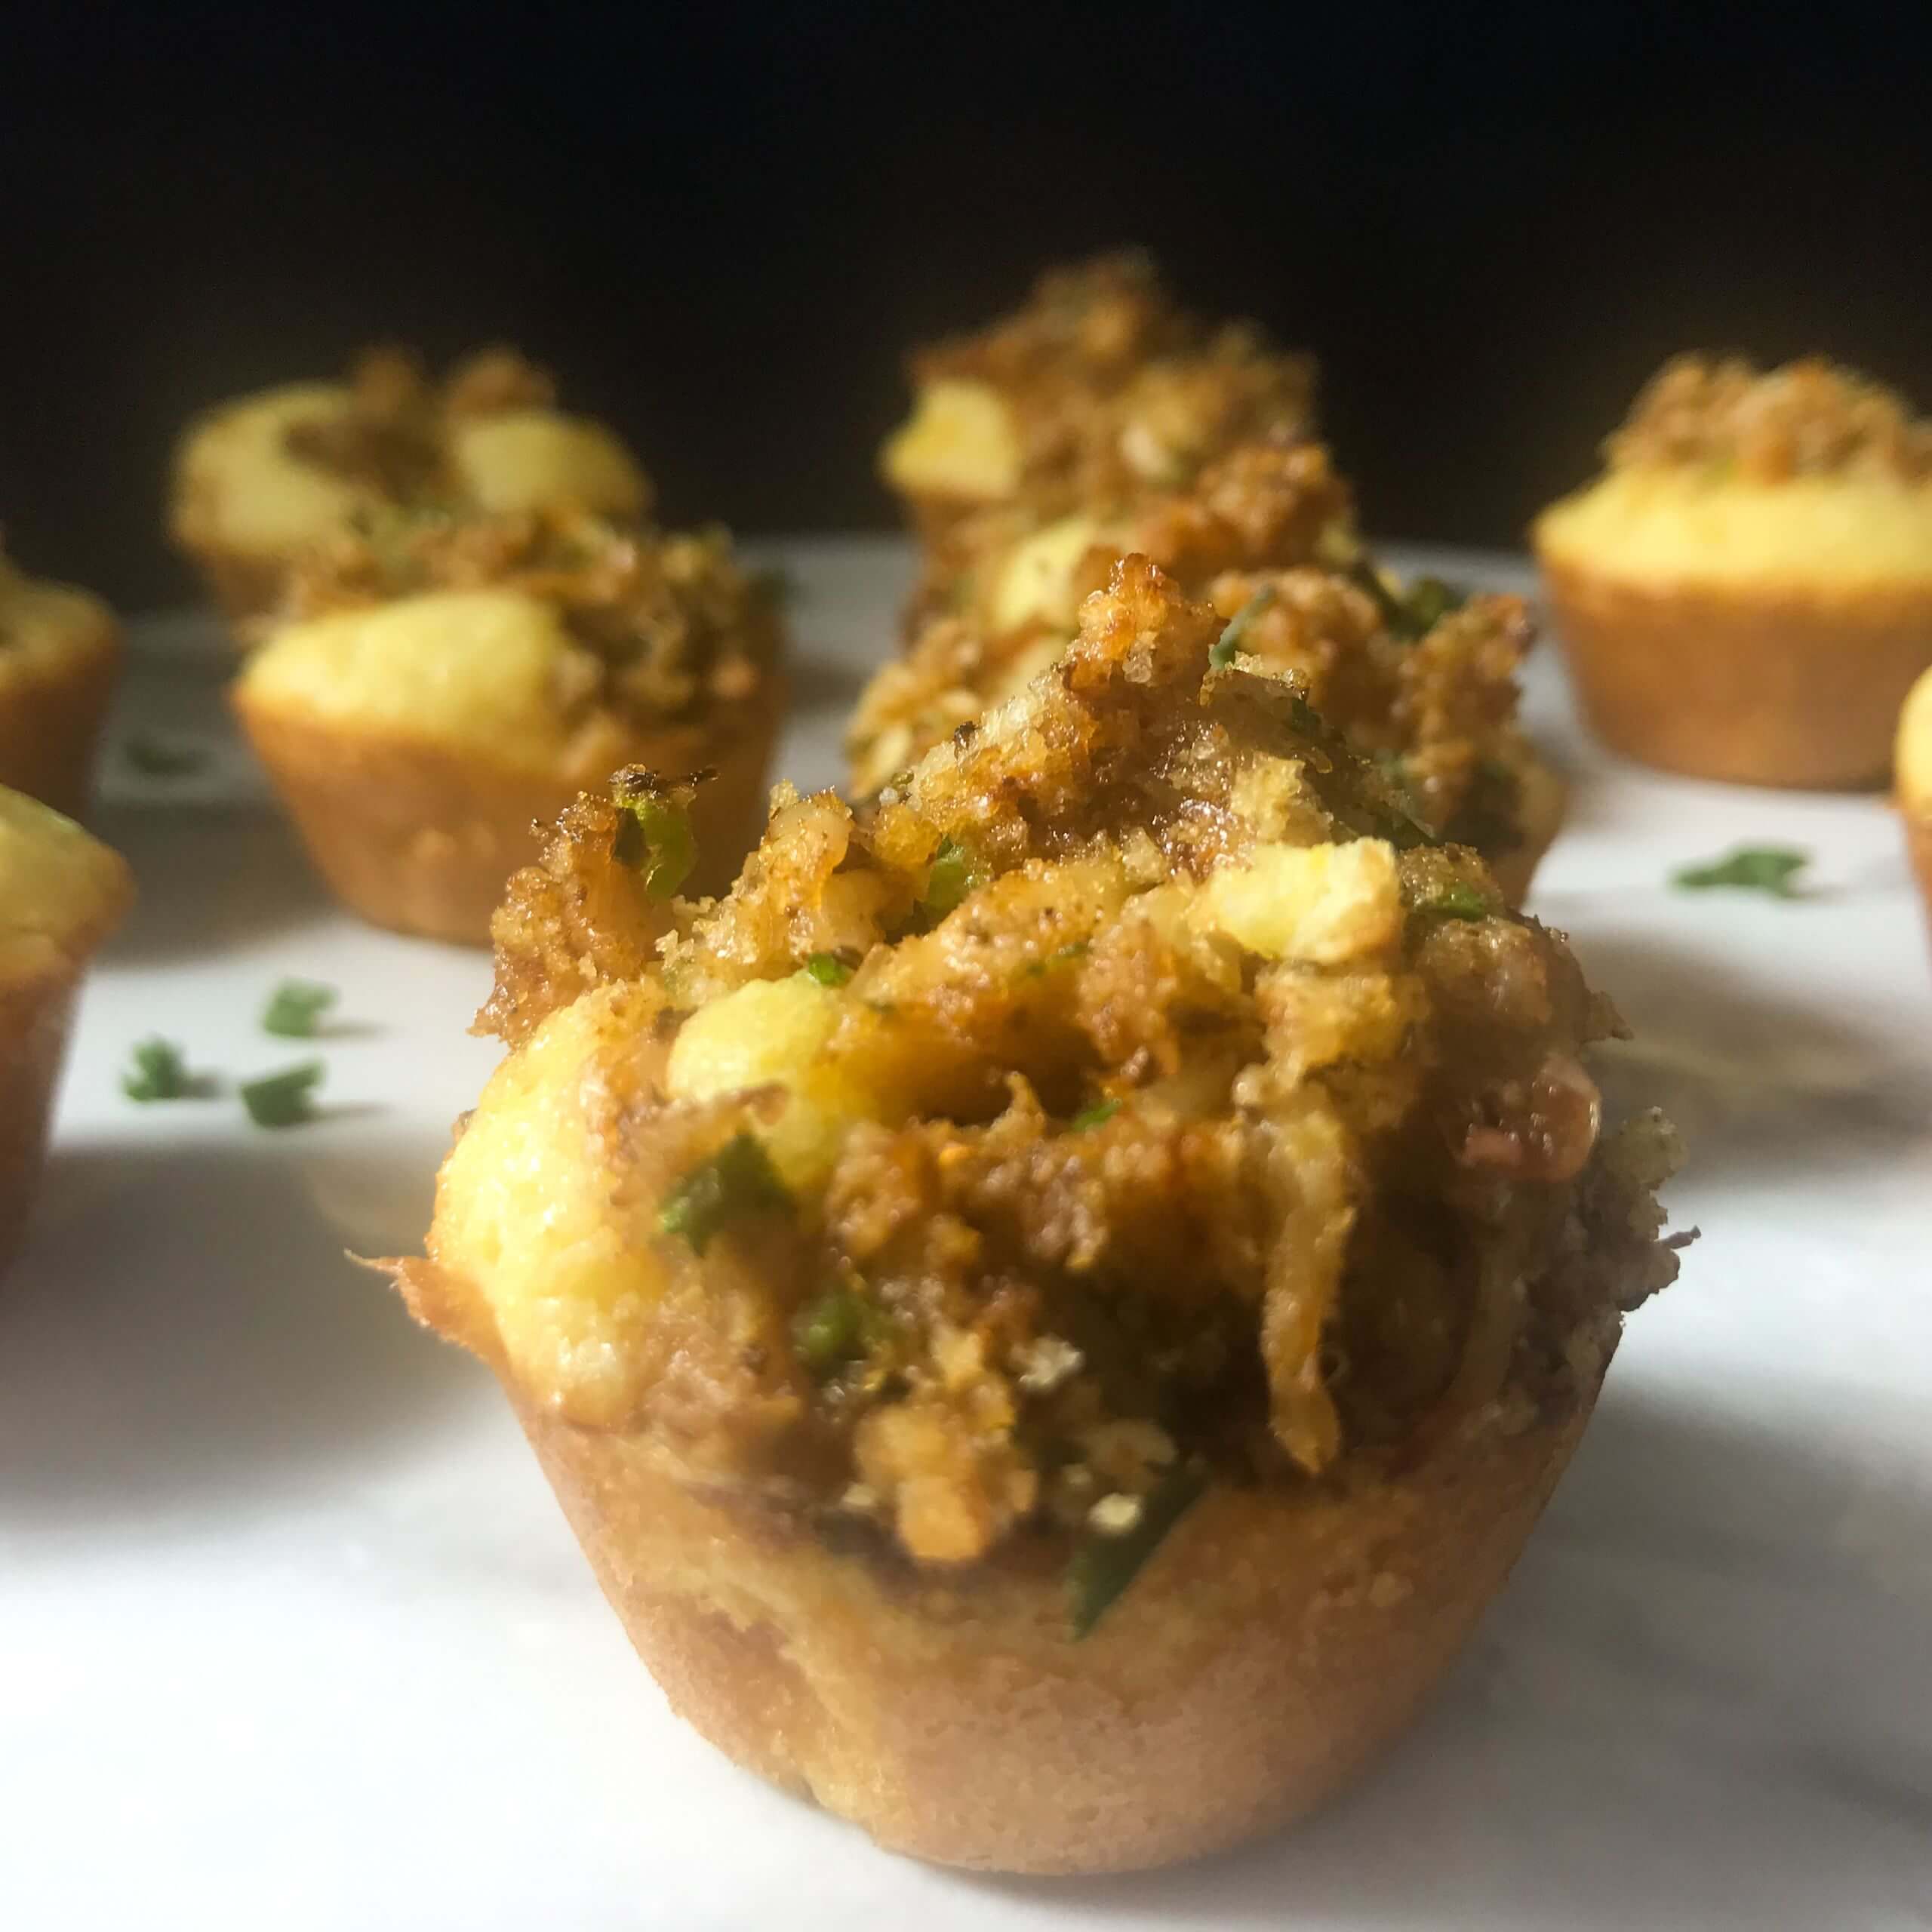 UPCLOSE PHOTO OF COOKED CRABBY MINI CORN MUFFINS